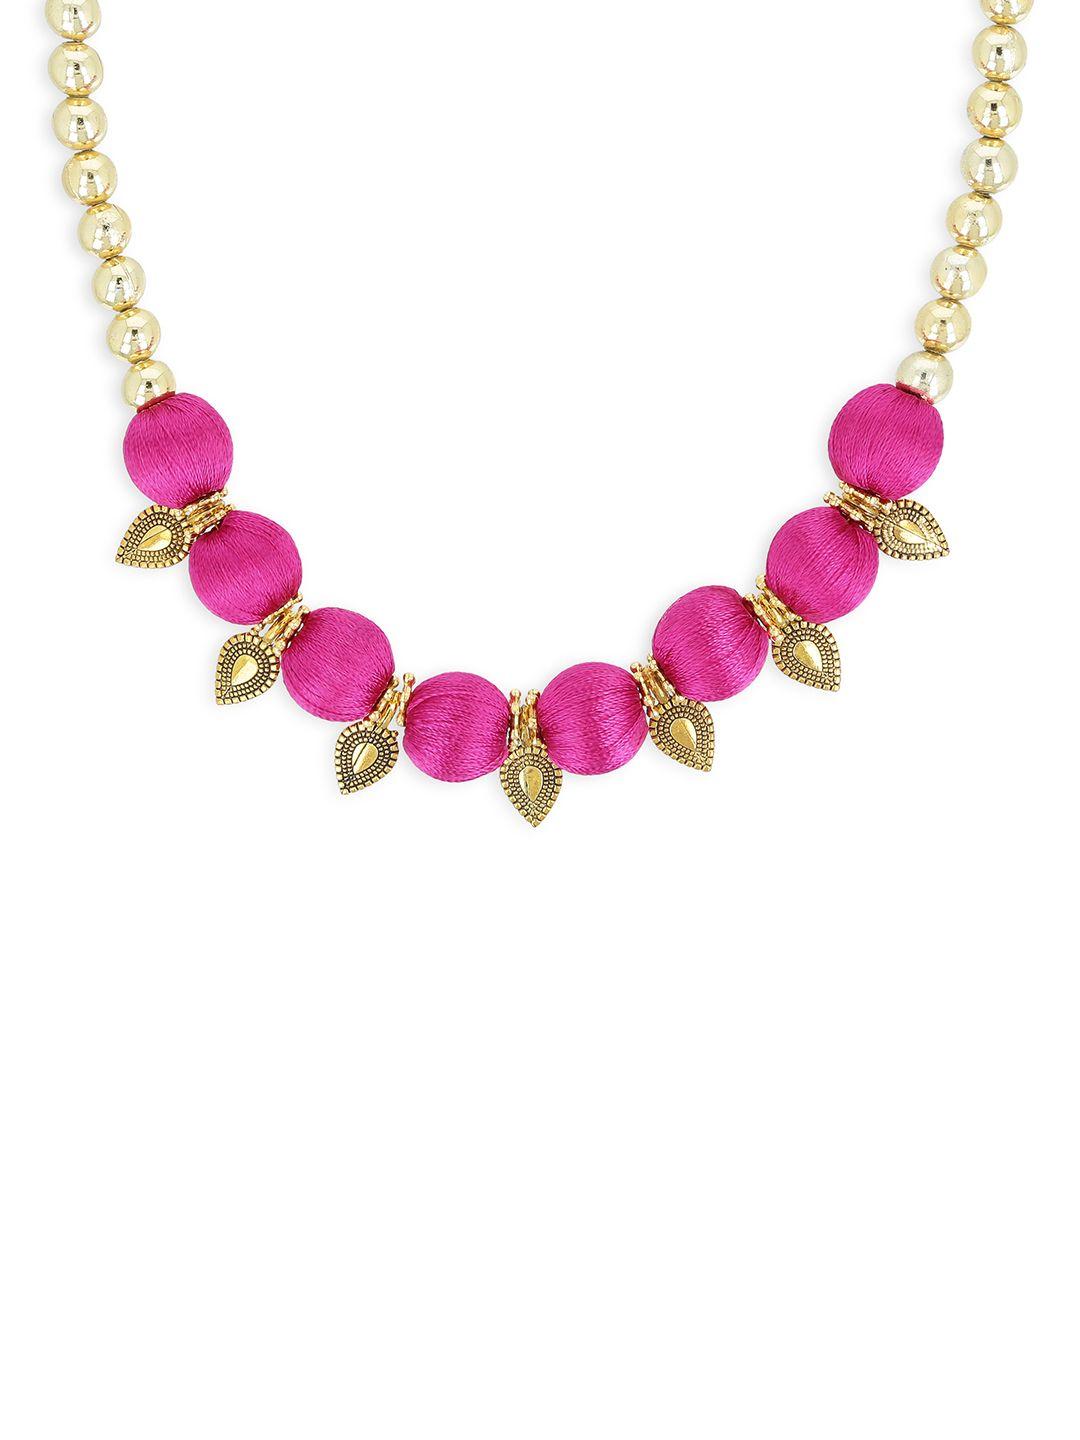 akshara gold-toned and pink handcrafted beaded necklace